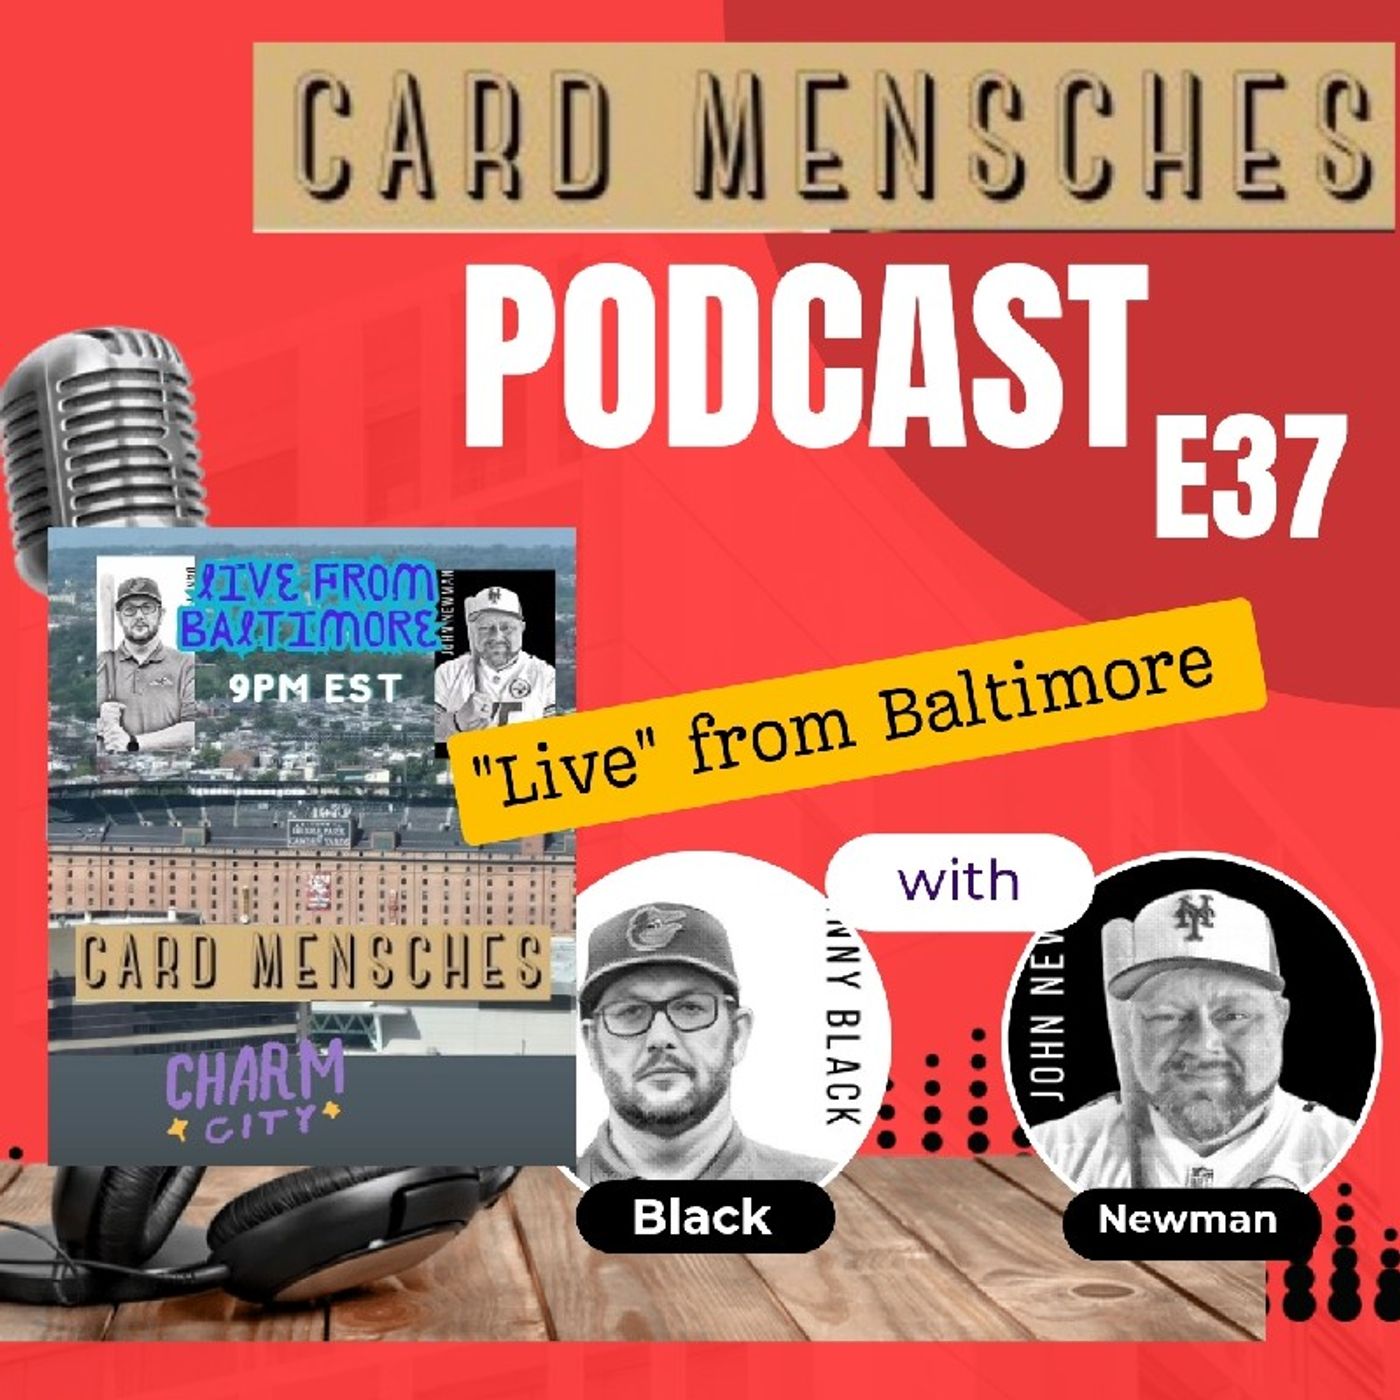 Card Mensches E37 "Live from Baltimore"